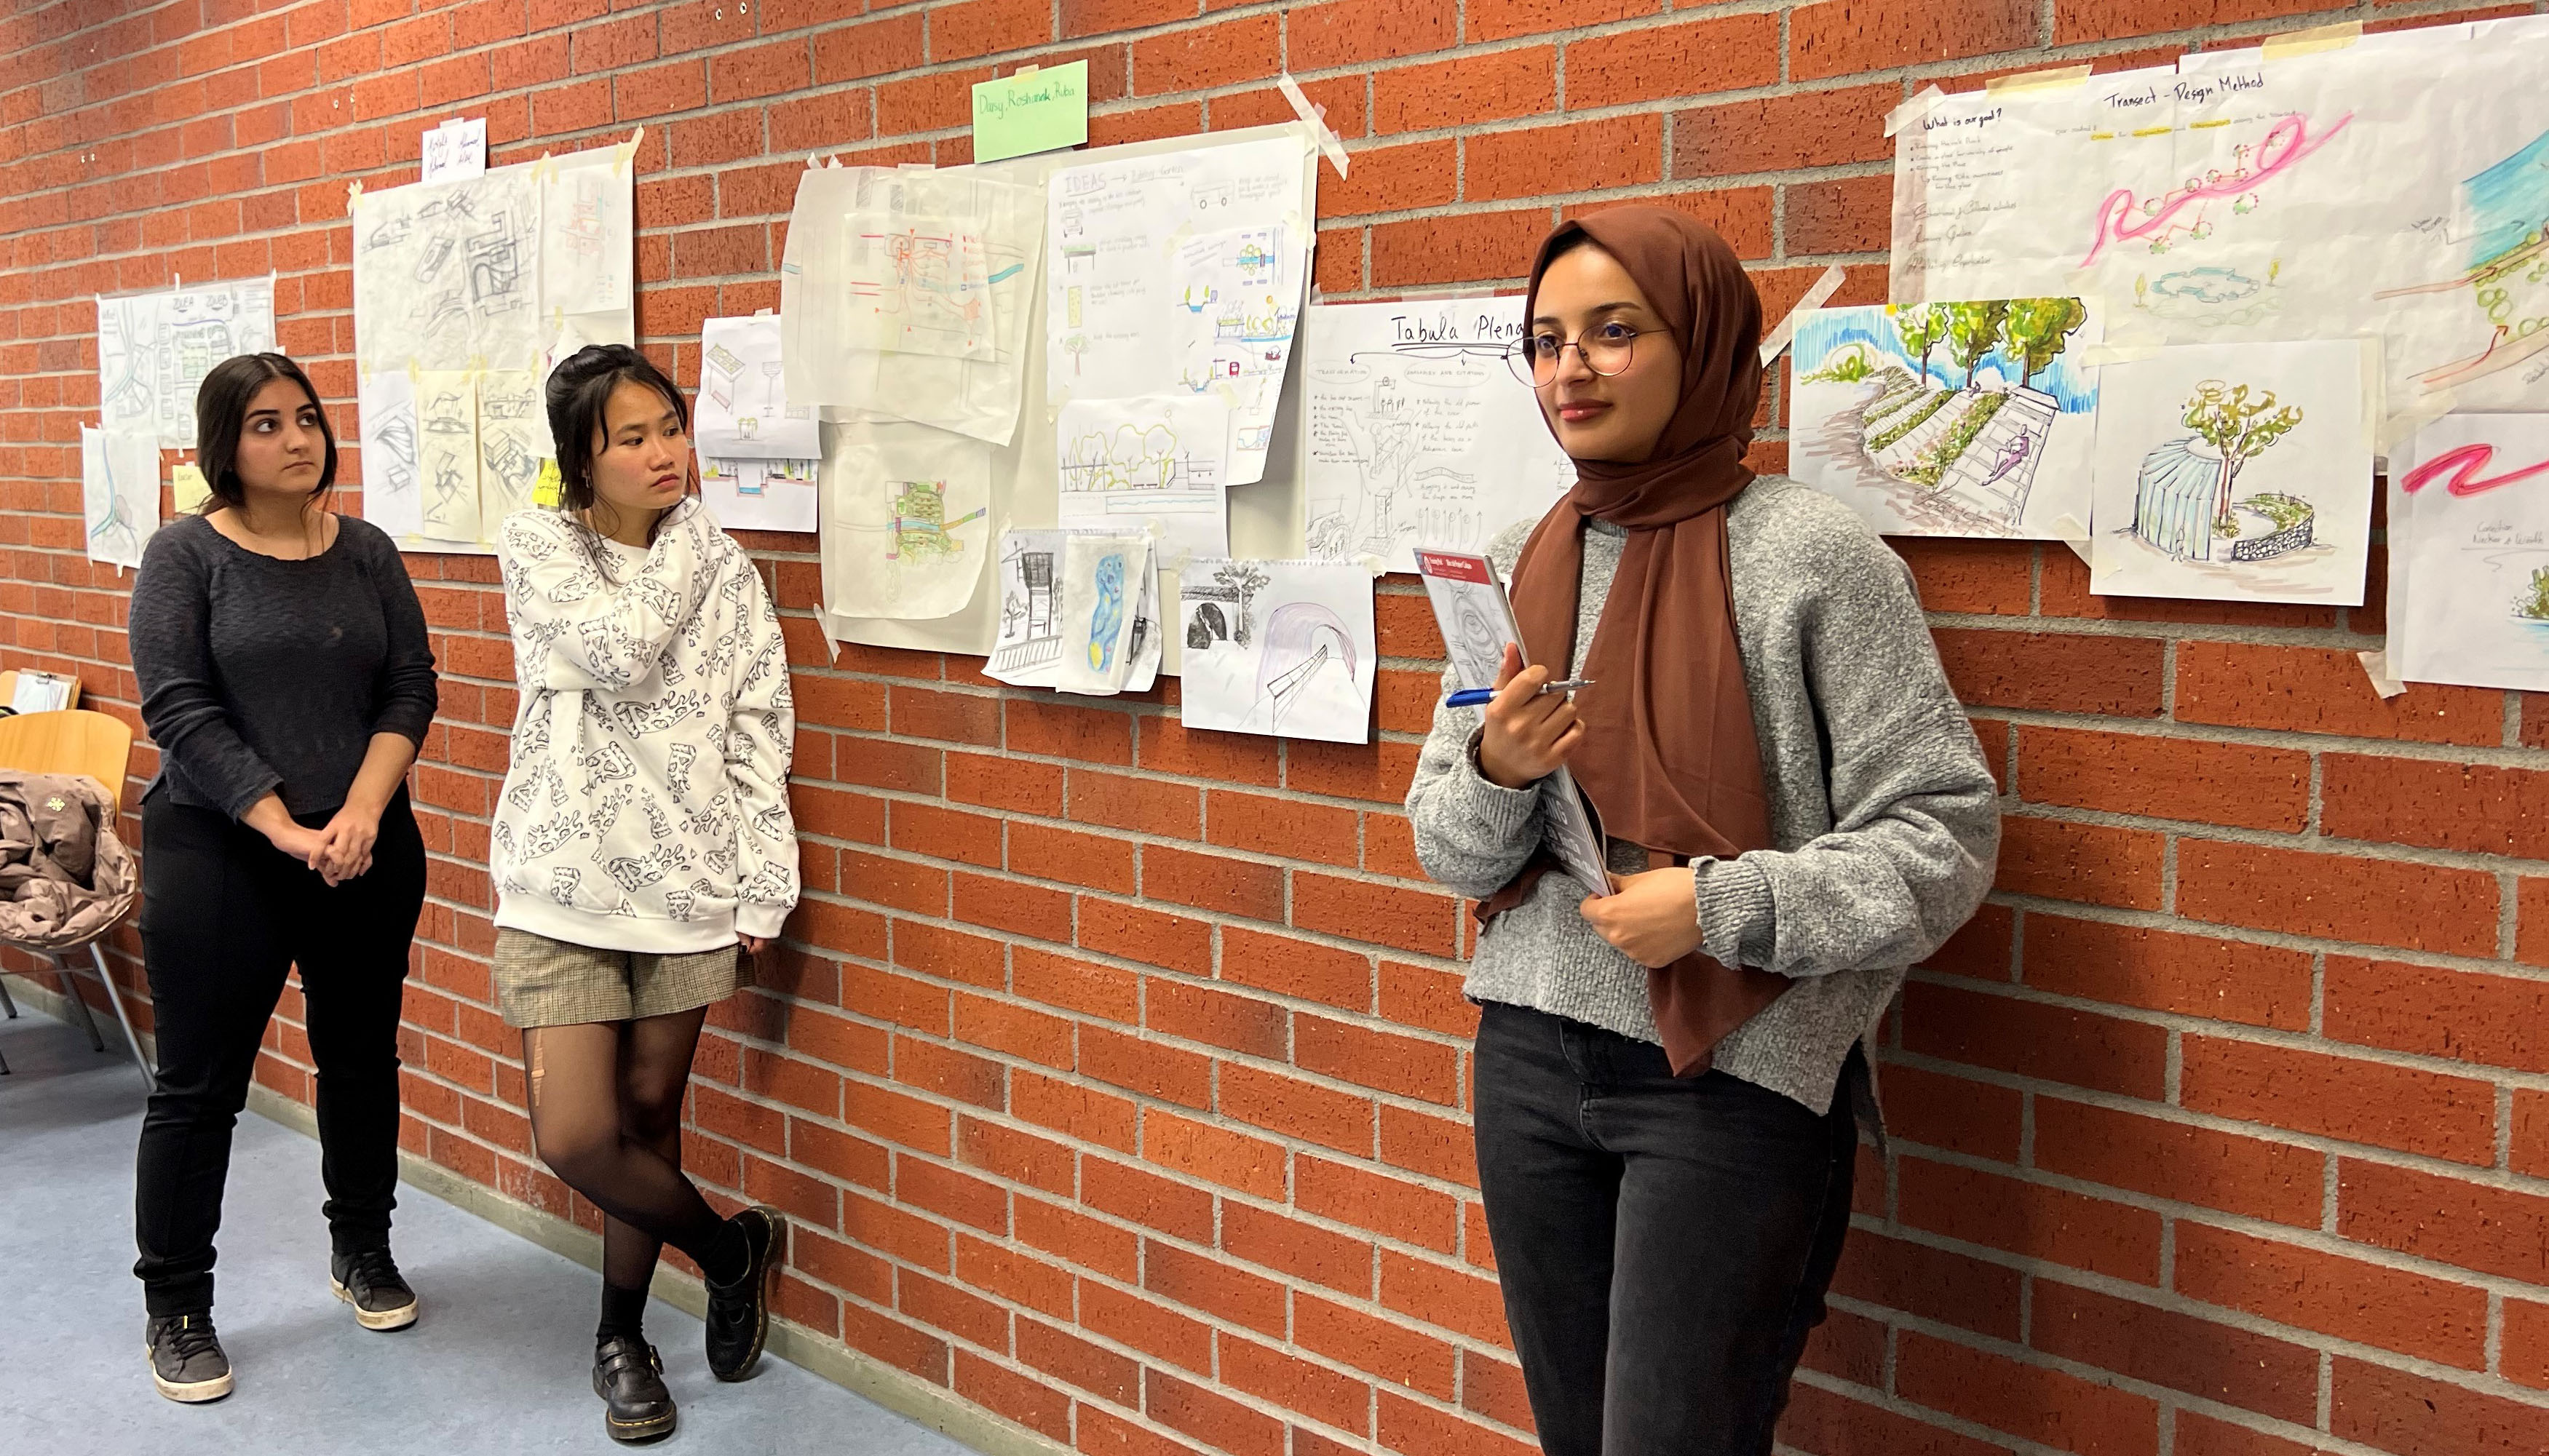 Photo detail of three female students in front of a wall with sketches and plans.